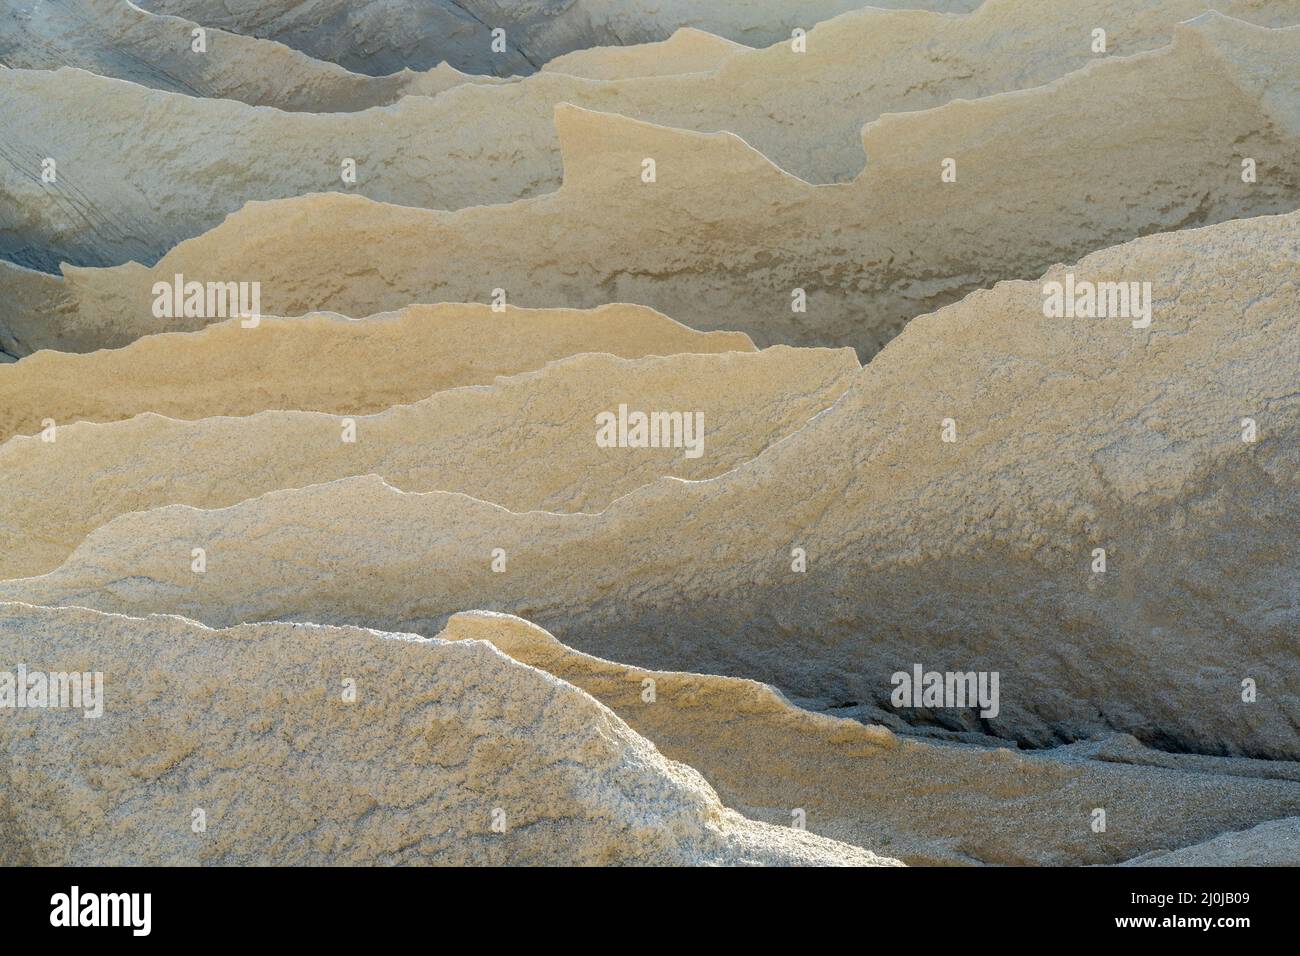 An abstract view of limestone and sandstone mountains with sharp edges Stock Photo